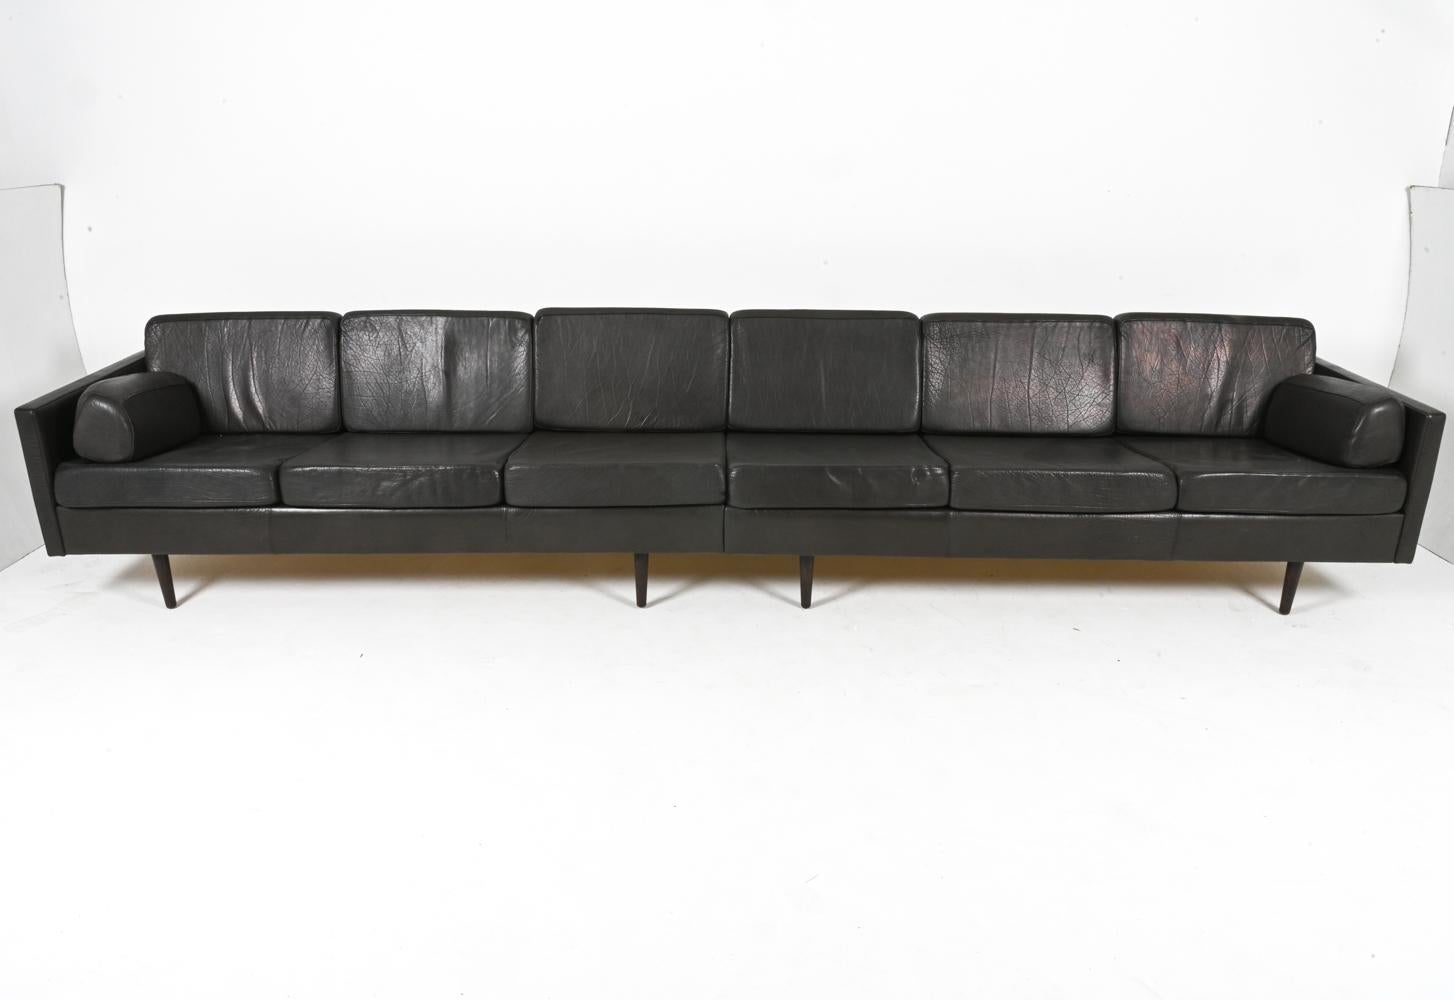 Immerse yourself in luxury and comfort with this expansive and monumental Danish leather sofa, a true statement piece crafted in the heart of the Mid-Century Modern era (circa 1960s). This grand sofa boasts a robust oak frame, its warm tones a